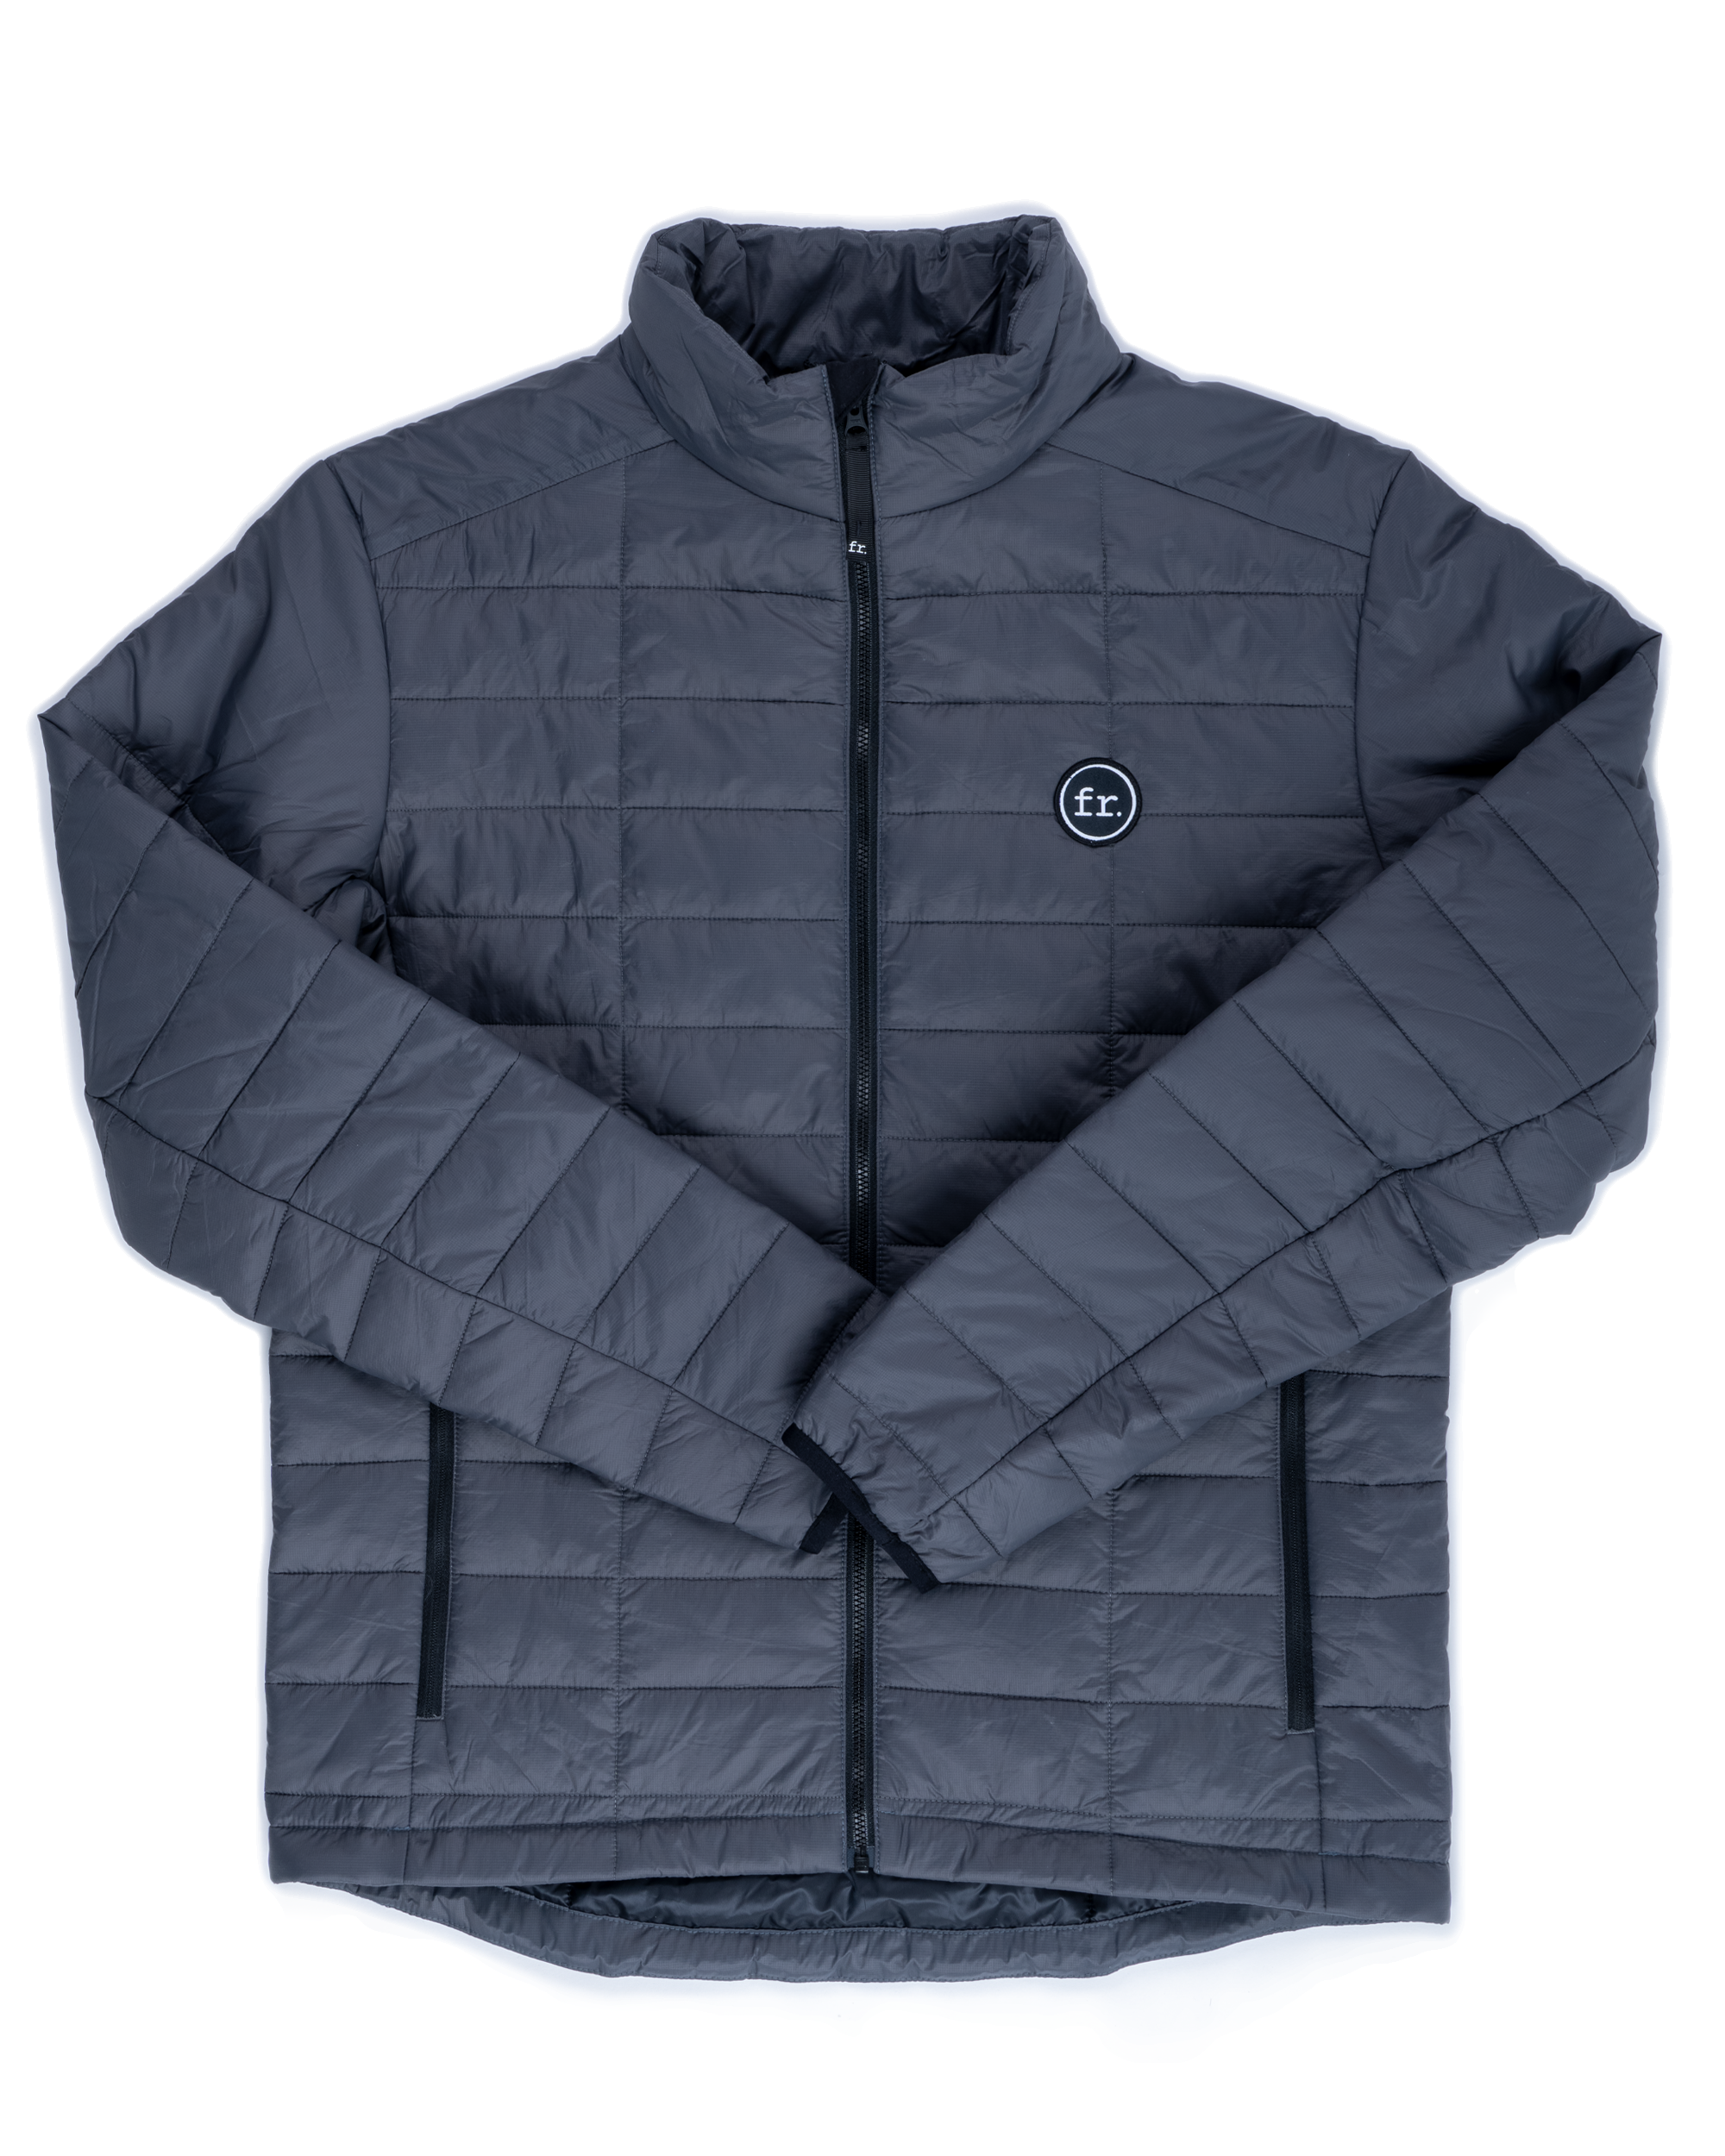 FR. Insulated Jacket Grey - Foreign Rider Co.